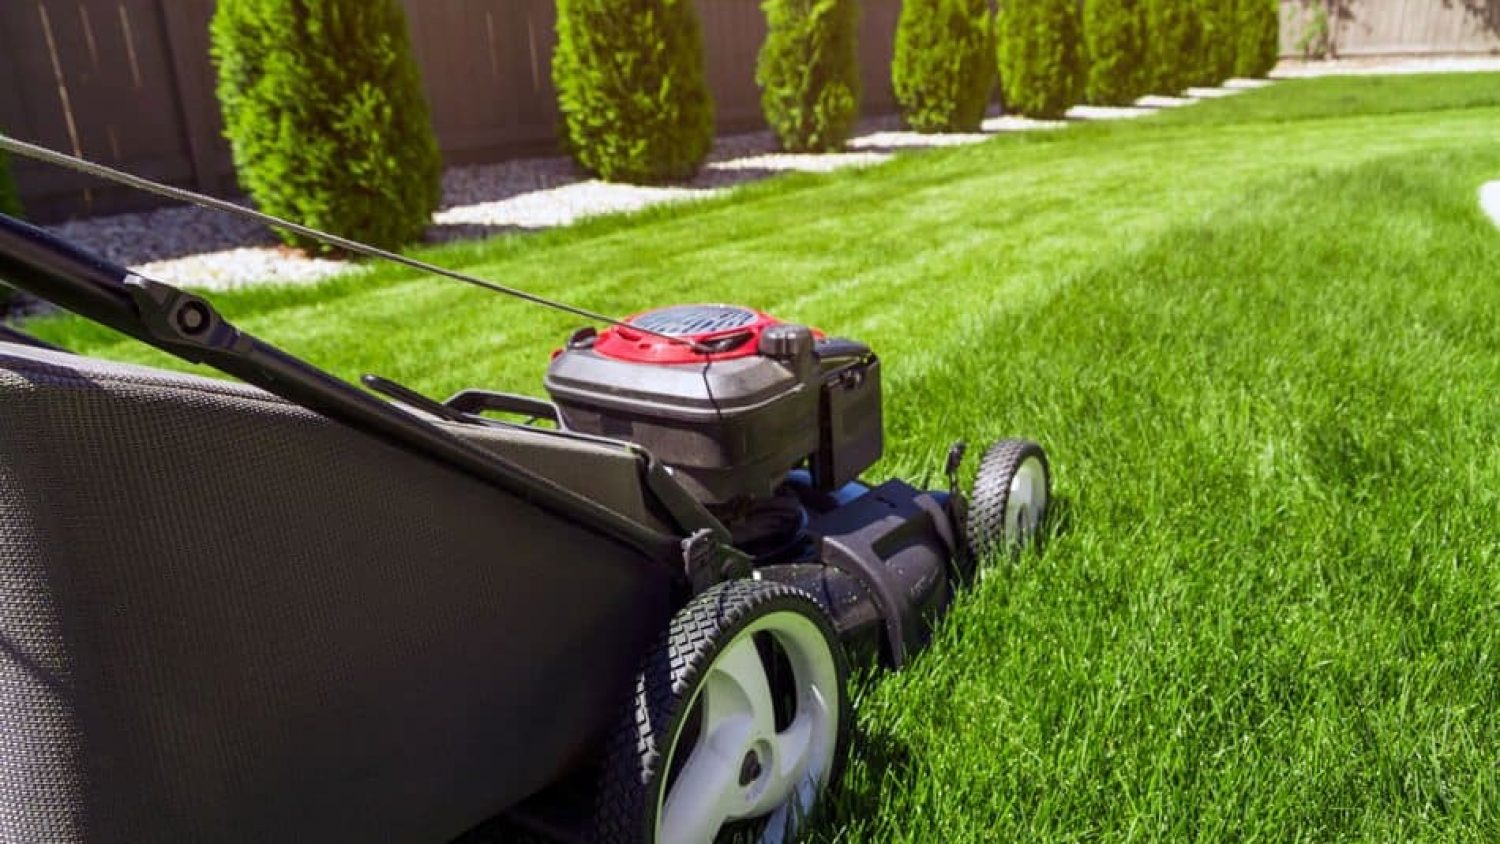 Top 18 Lawn Care Tips to Make Your Grass Greener